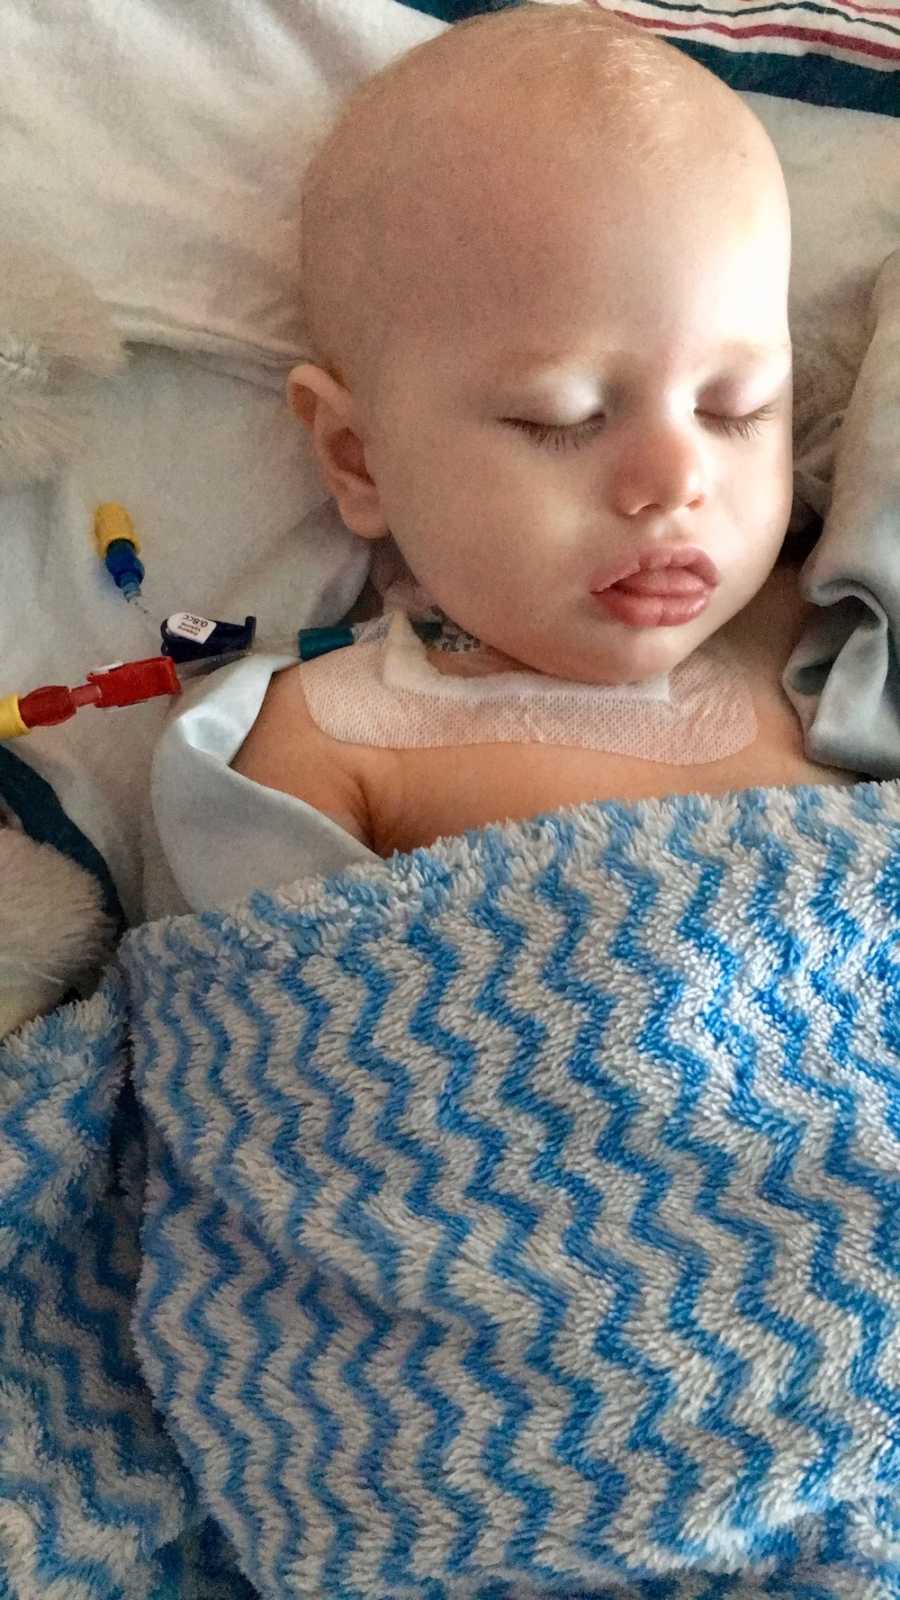 Baby with Transverse Myelitis lays asleep in hospital bed wrapped in blue and white chevron blanket